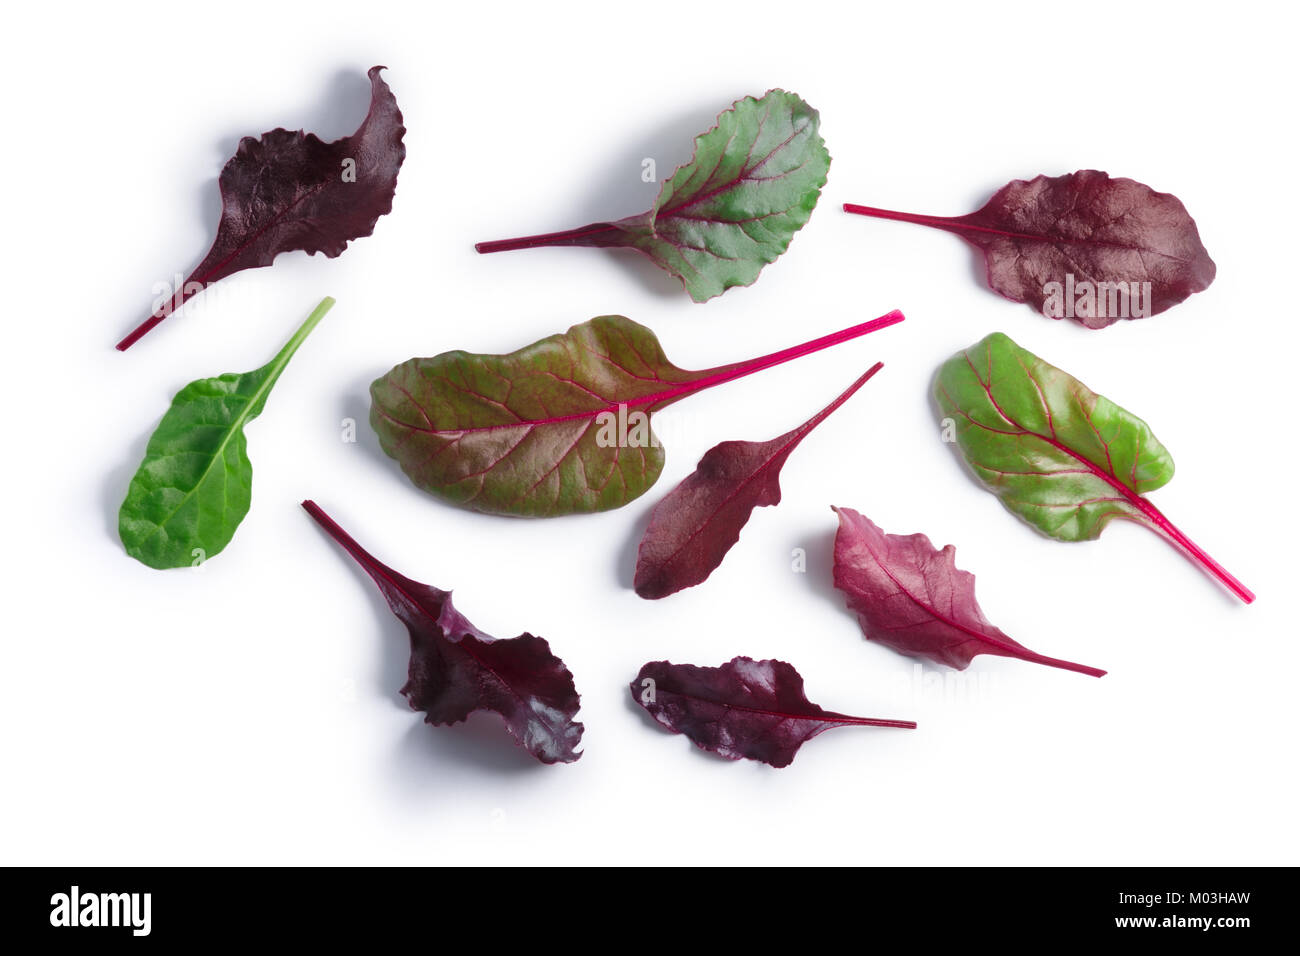 Leaves of baby Swiss chard or Mangold (Beta vulgaris subsp. Cicla-Group). Clipping paths, shadows separated, top view Stock Photo